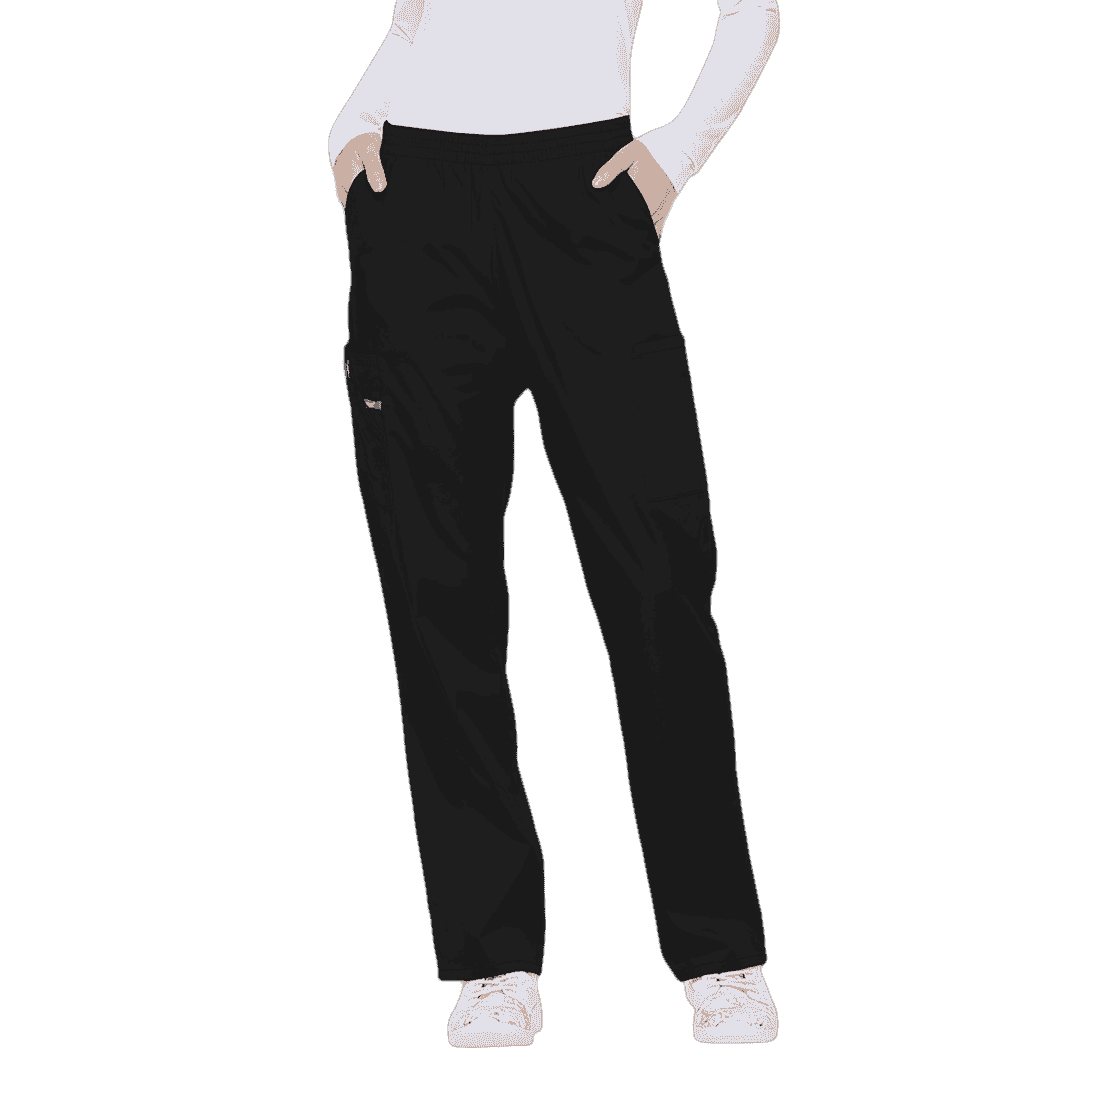 Women's Natural Rise Pull-On Scrub Trousers 86106 Black